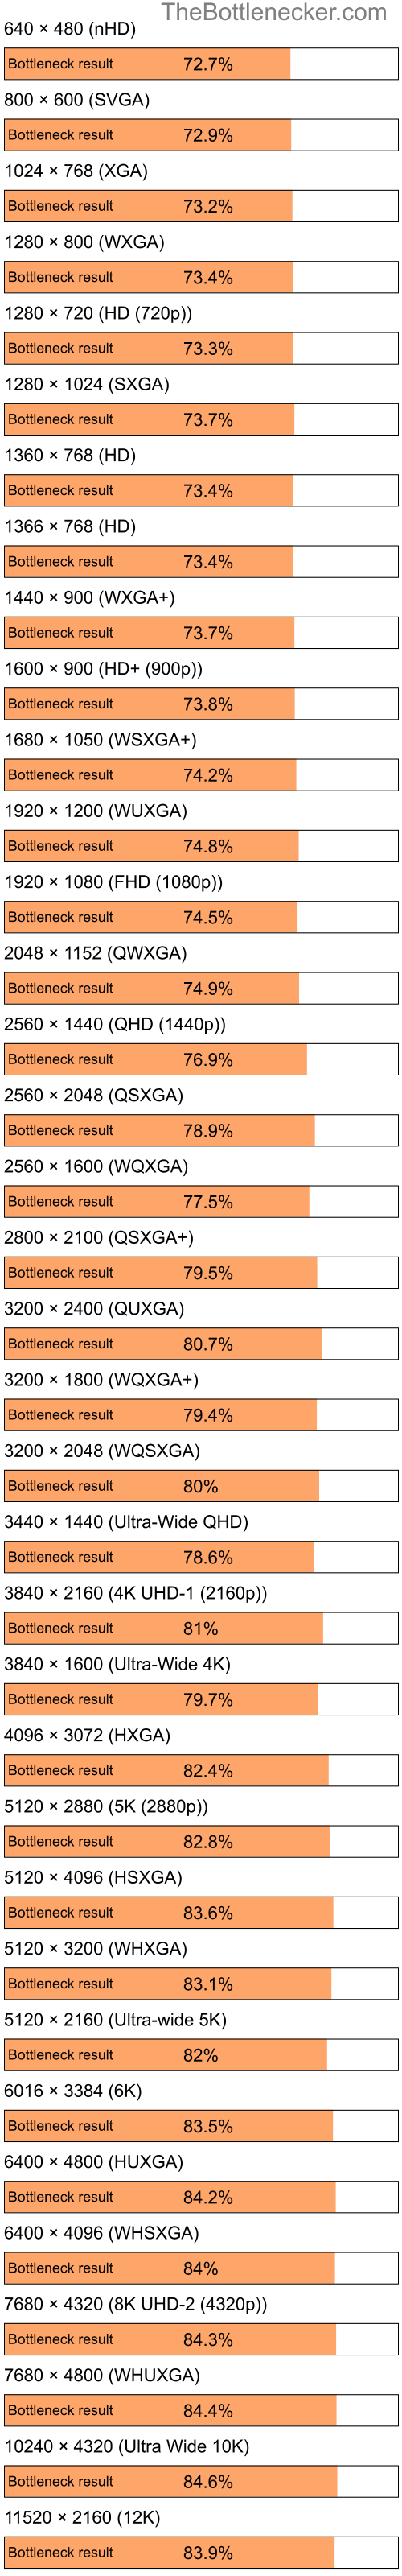 Bottleneck results by resolution for Intel Atom Z520 and AMD Mobility Radeon X1400 in General Tasks